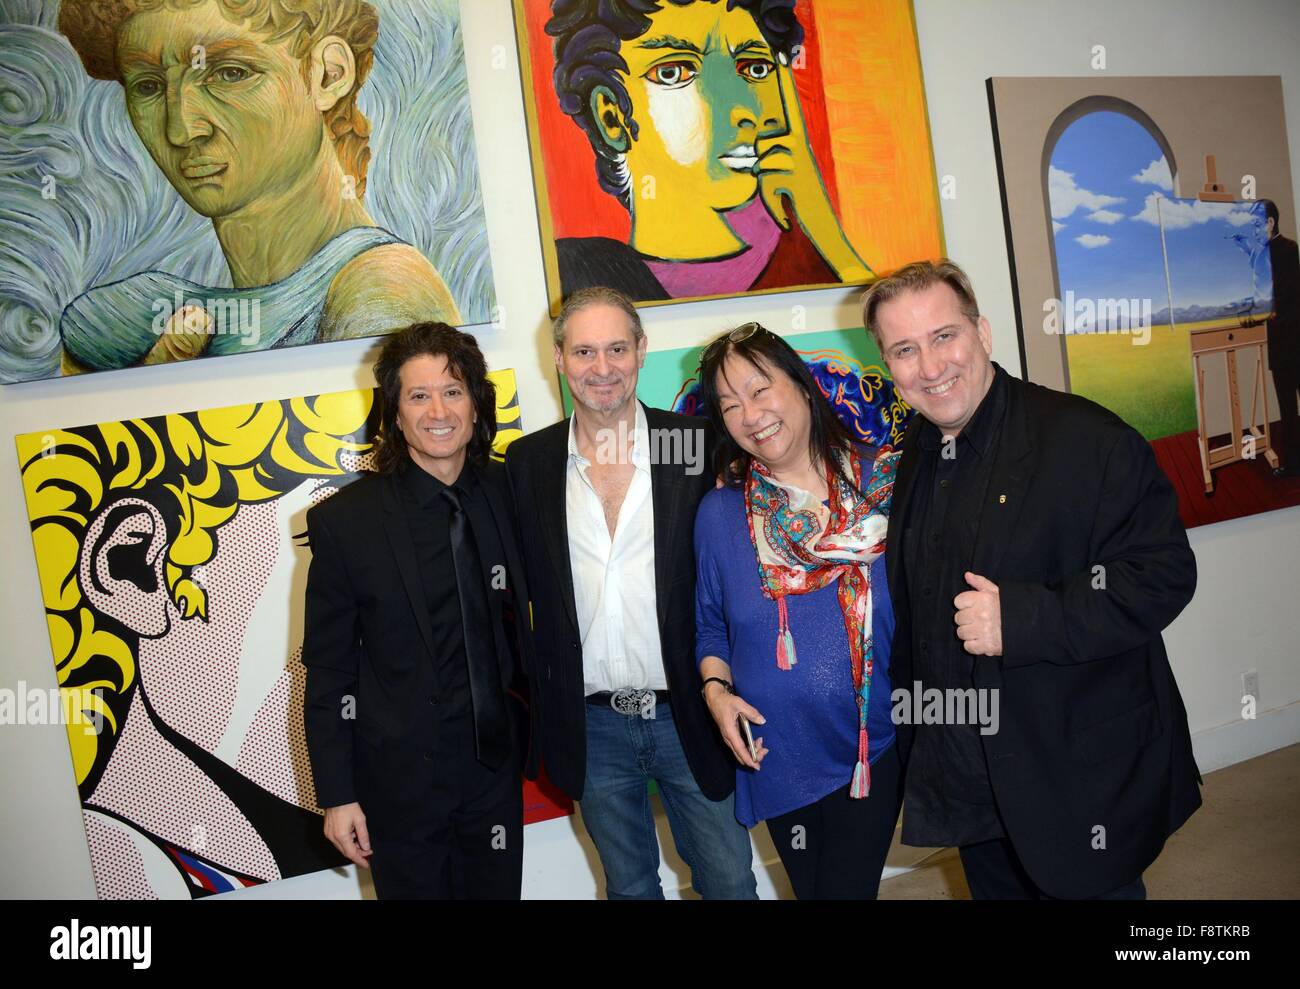 New York, NY, USA. 10th Dec, 2015. Michael Cartellone, Steve Walter, May Pang, Mark Kostabi in attendance for Michael Cartellone Art Opening, Soho Contemporary Art, New York, NY December 10, 2015. © Derek Storm/Everett Collection/Alamy Live News Stock Photo